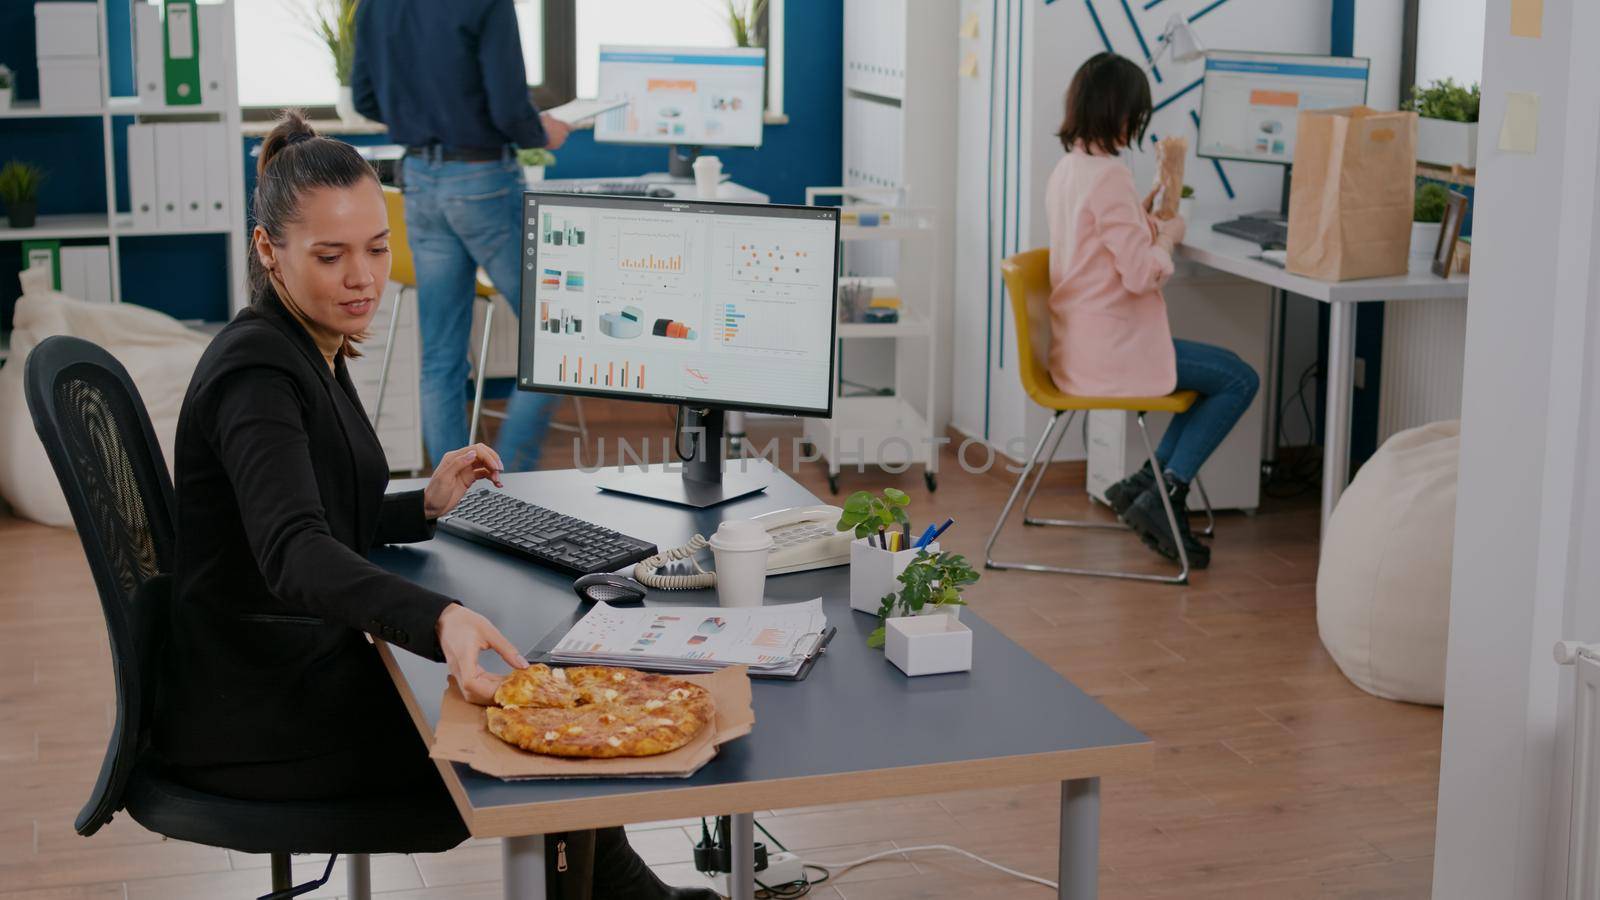 Businesswoman on lunch break at her table eating pizza fastfood delivery. Takeaway delivery meal order package delivered at workplace office. Takeout food at lunchtime eating at desk